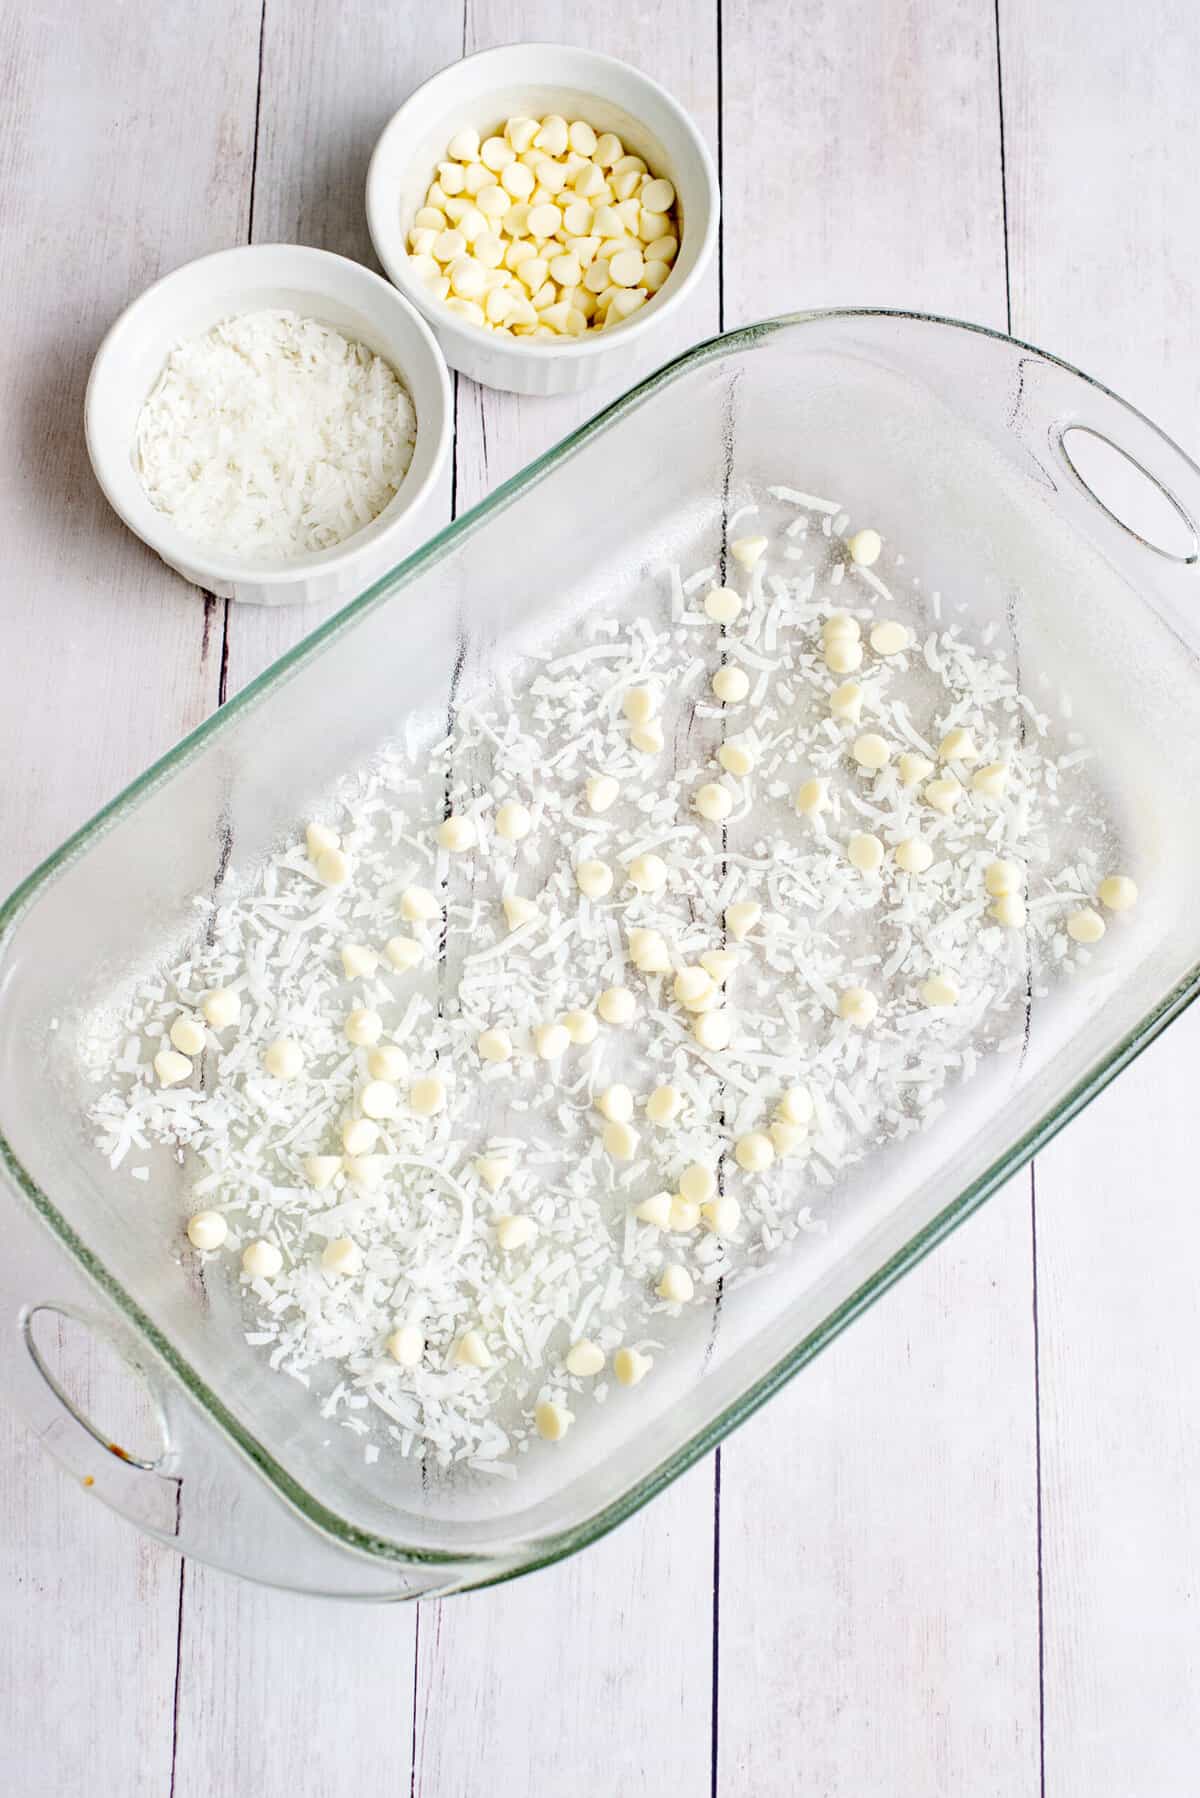 layer coconut and vanilla chips on the bottom of the pan